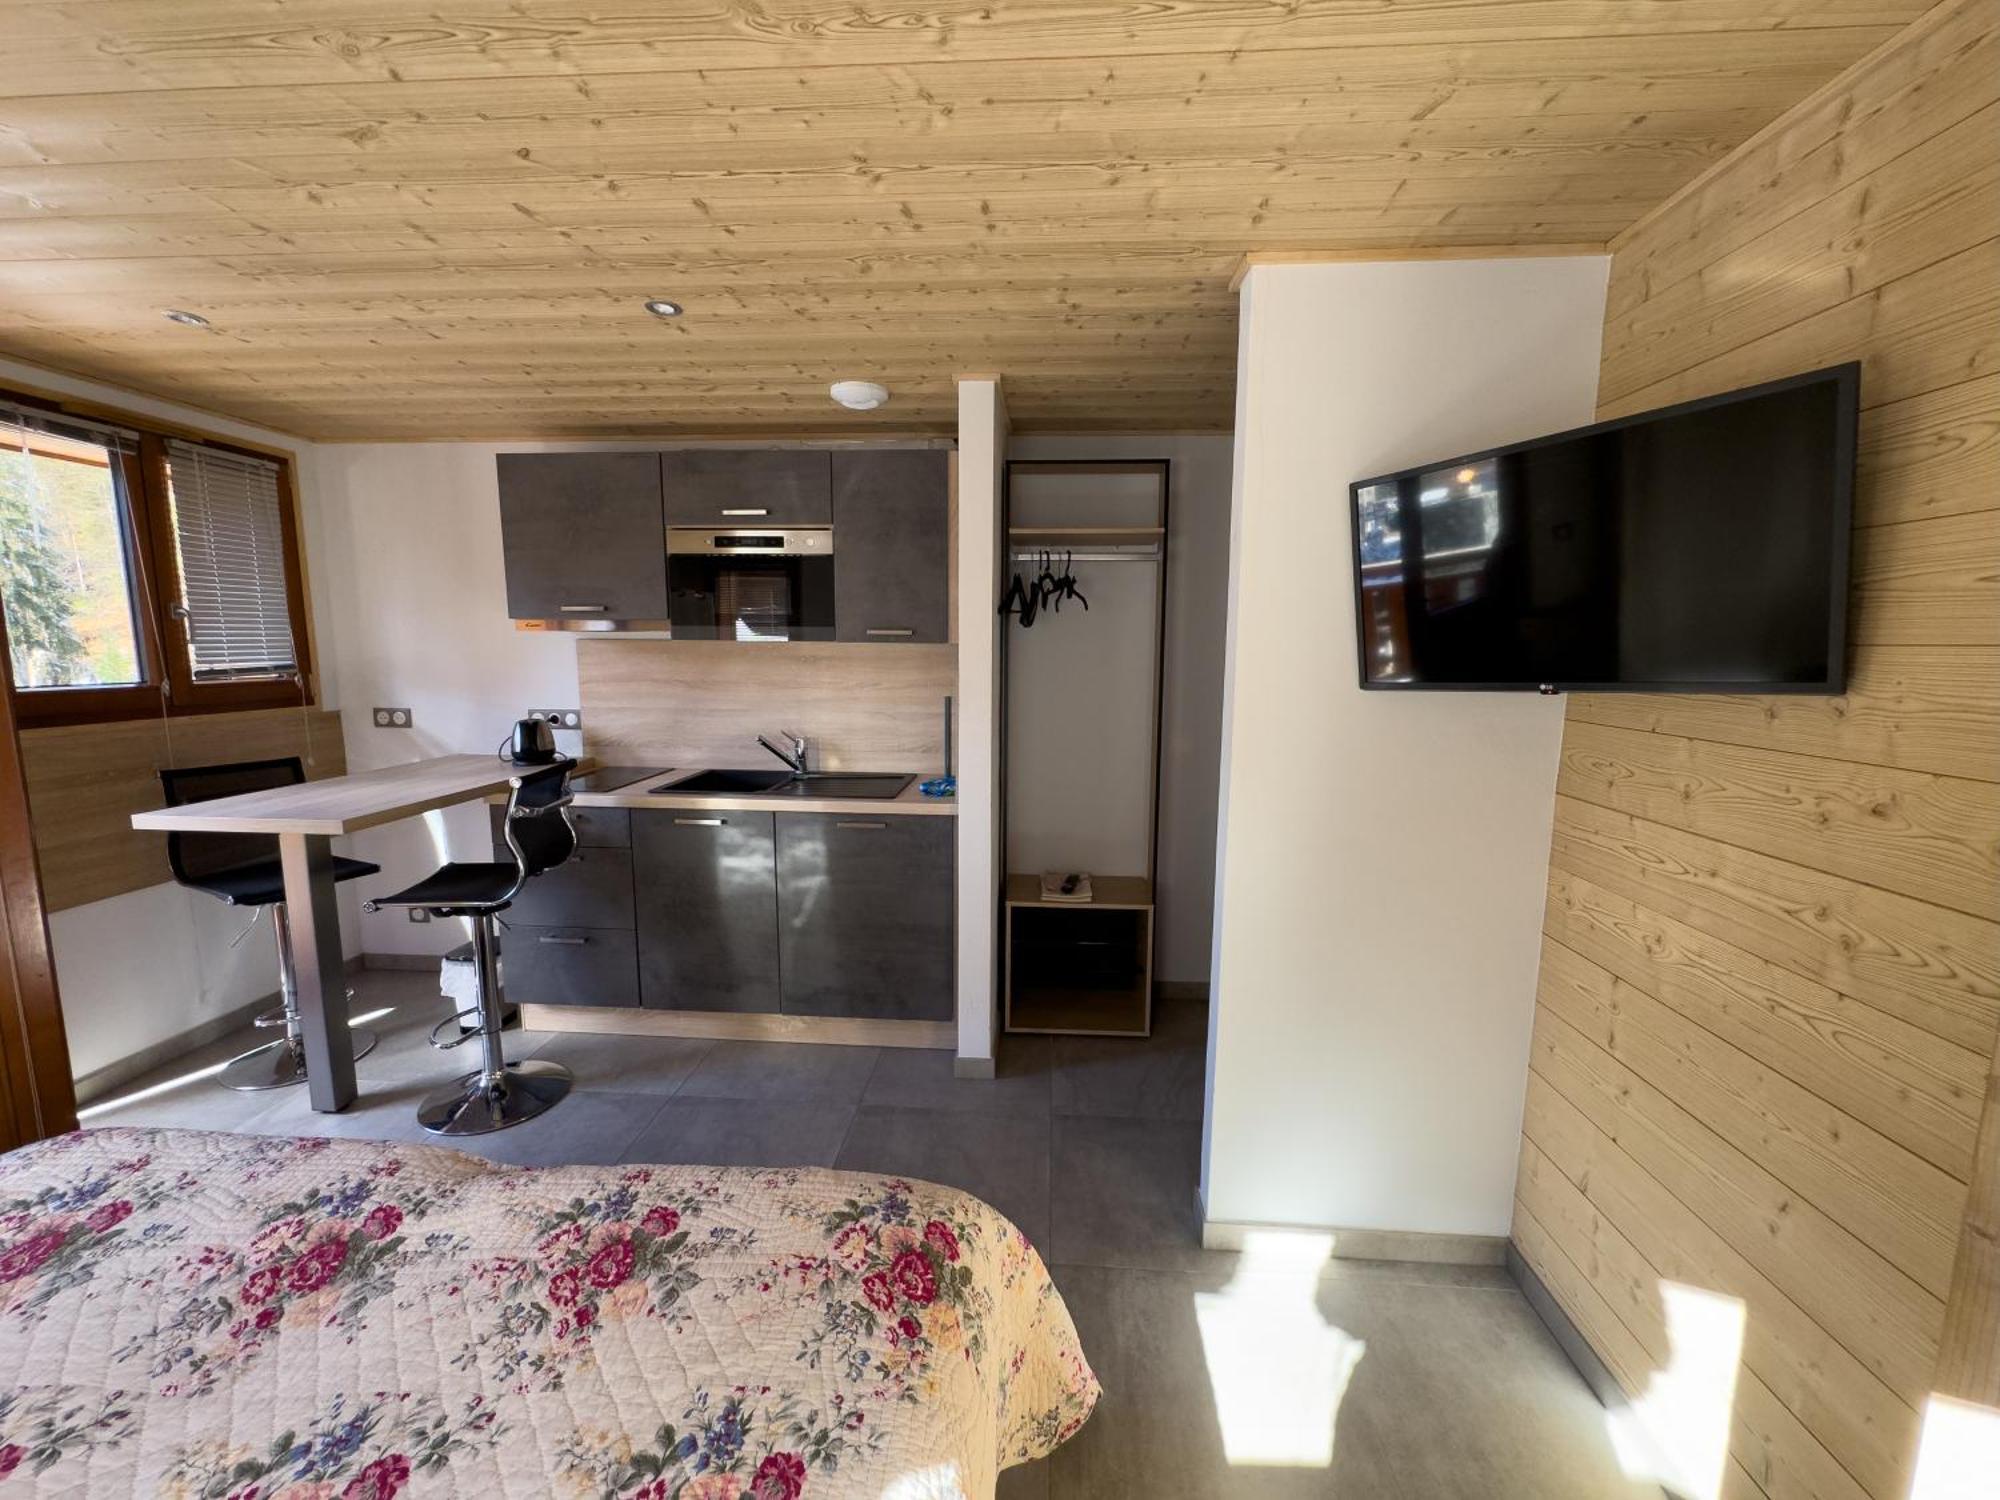 Le A By Neige Et Roc Bed and Breakfast Morzine Exterior foto